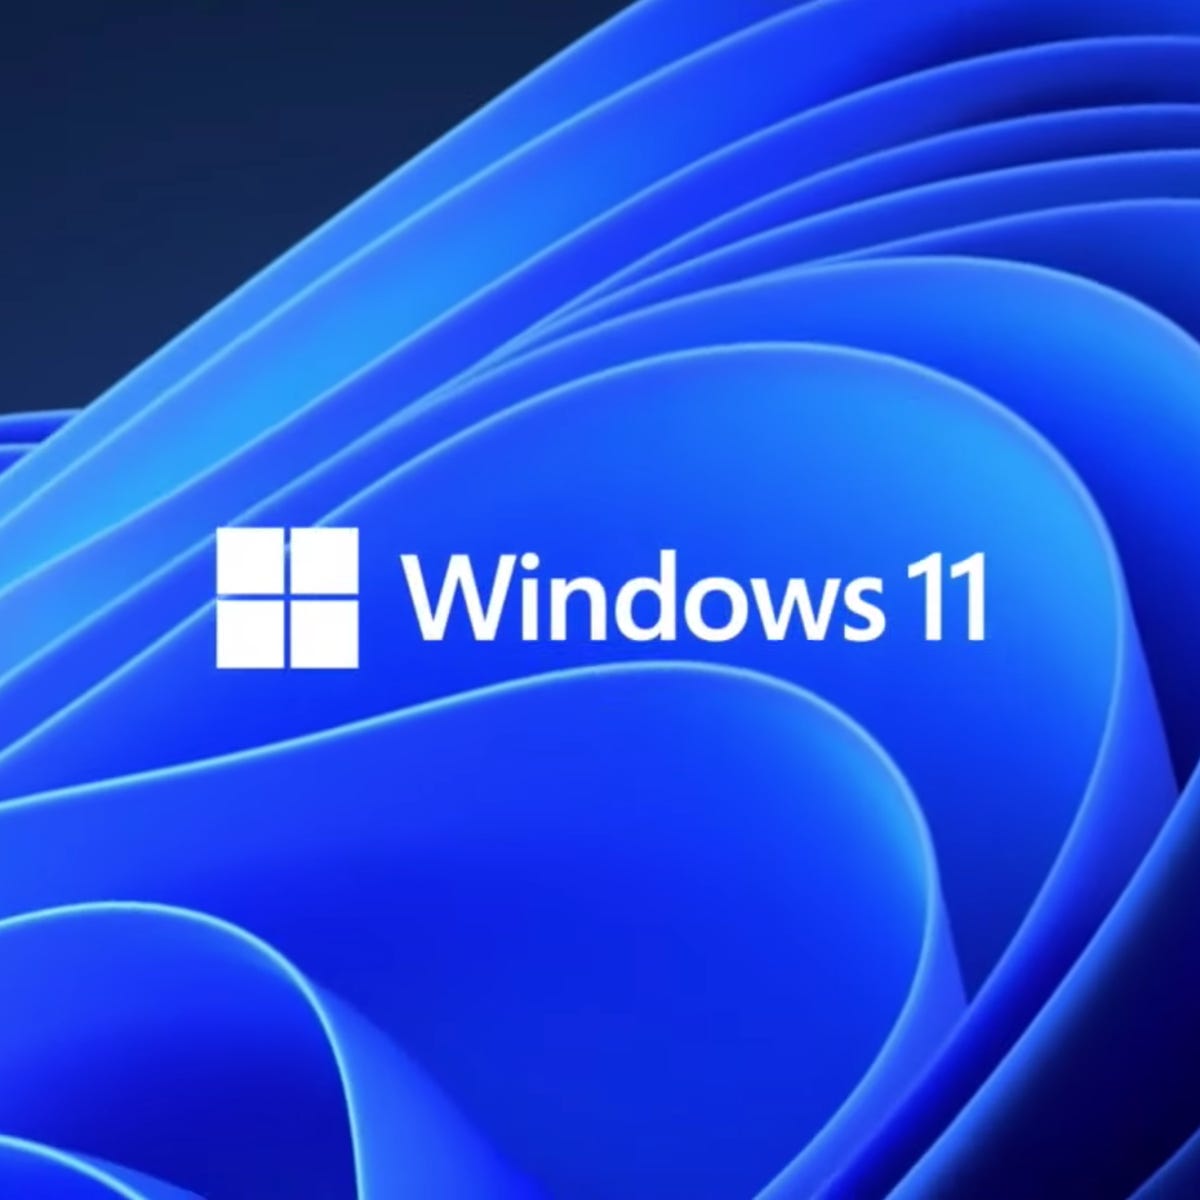 download windows 10 from windows 11